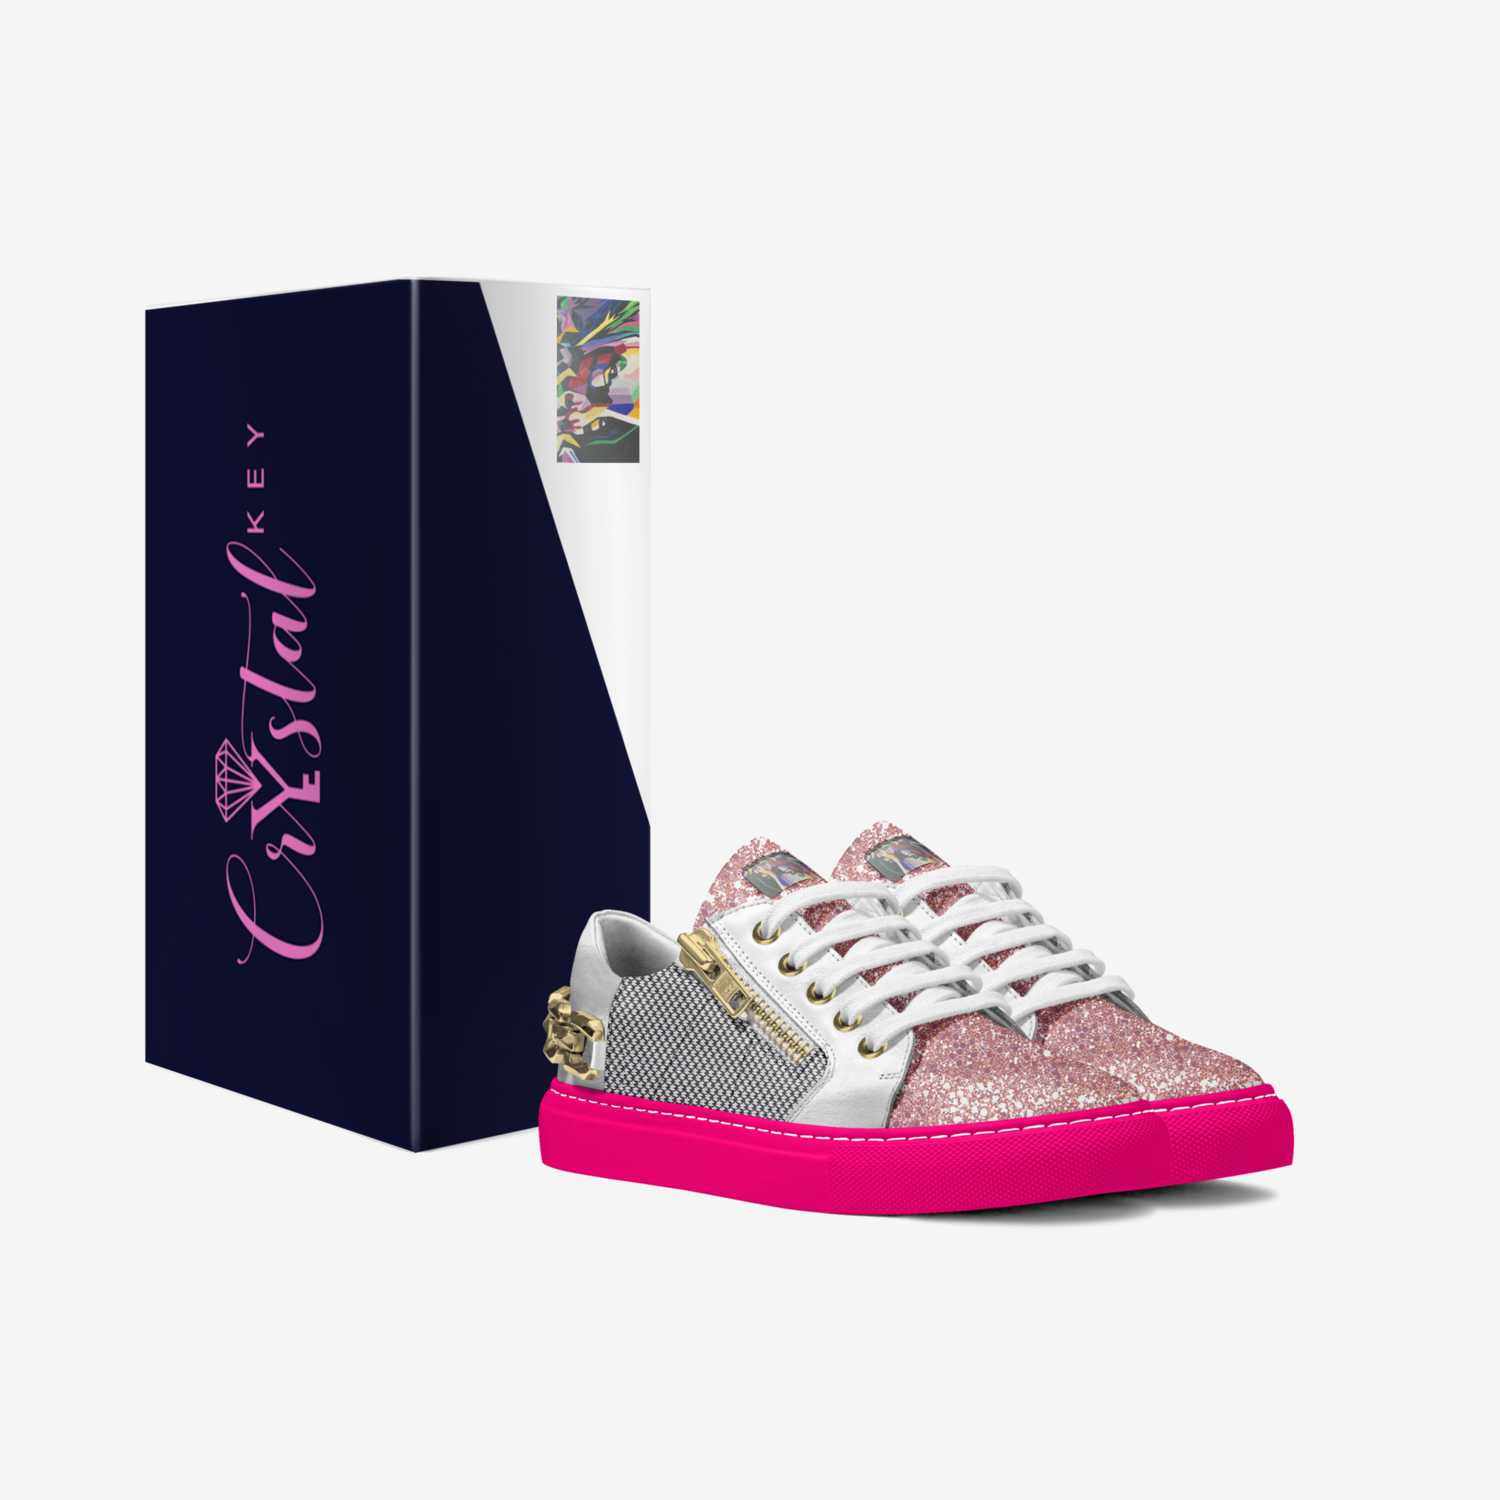 Crystal Key custom made in Italy shoes by Crystal G Metzler | Box view